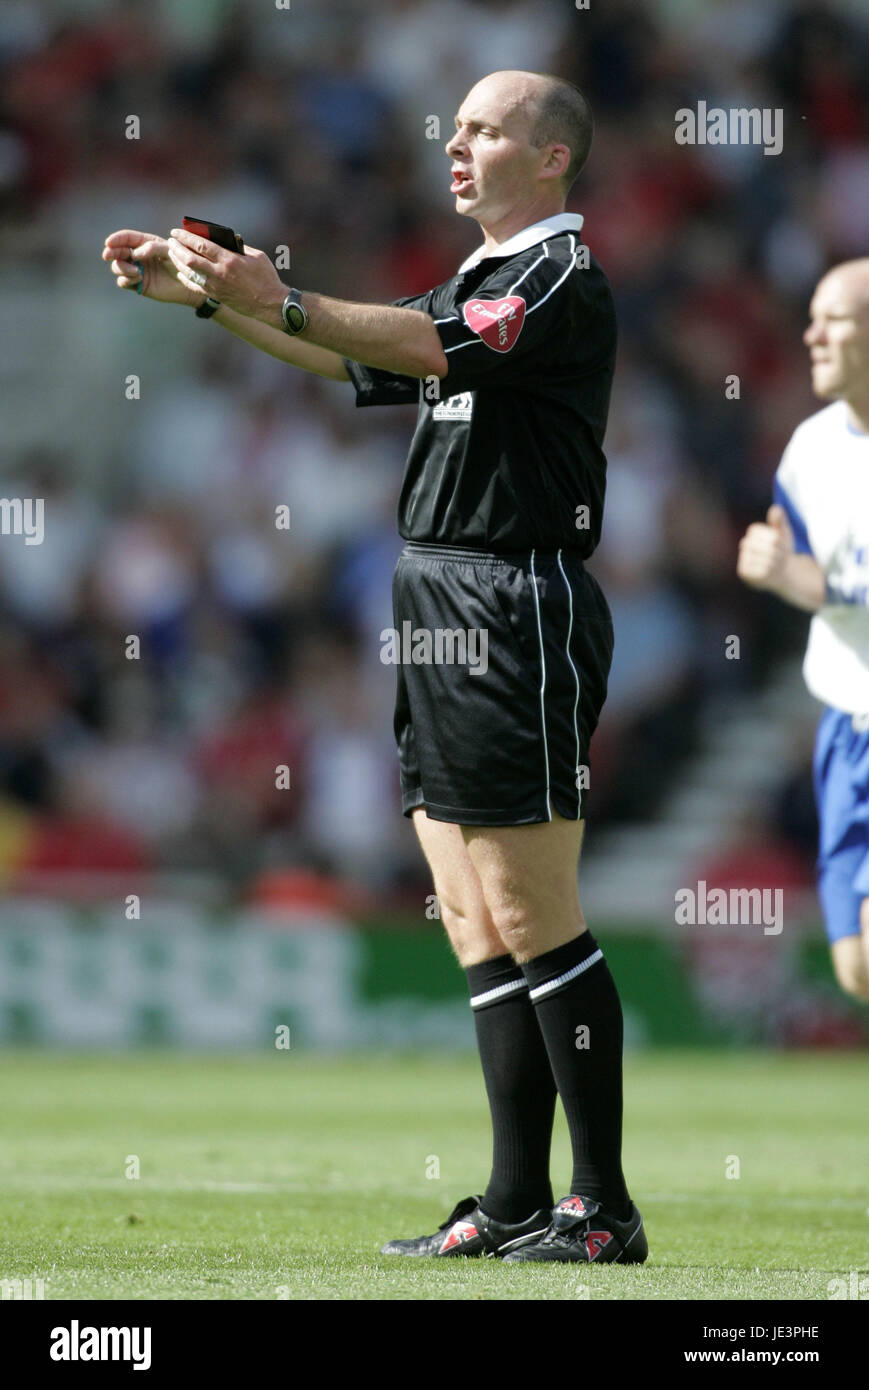 MIKE DEAN FIFA REFEREE RIVERSIDE STADIUM MIDDLESBROUGH 28 August 2004 Stock Photo